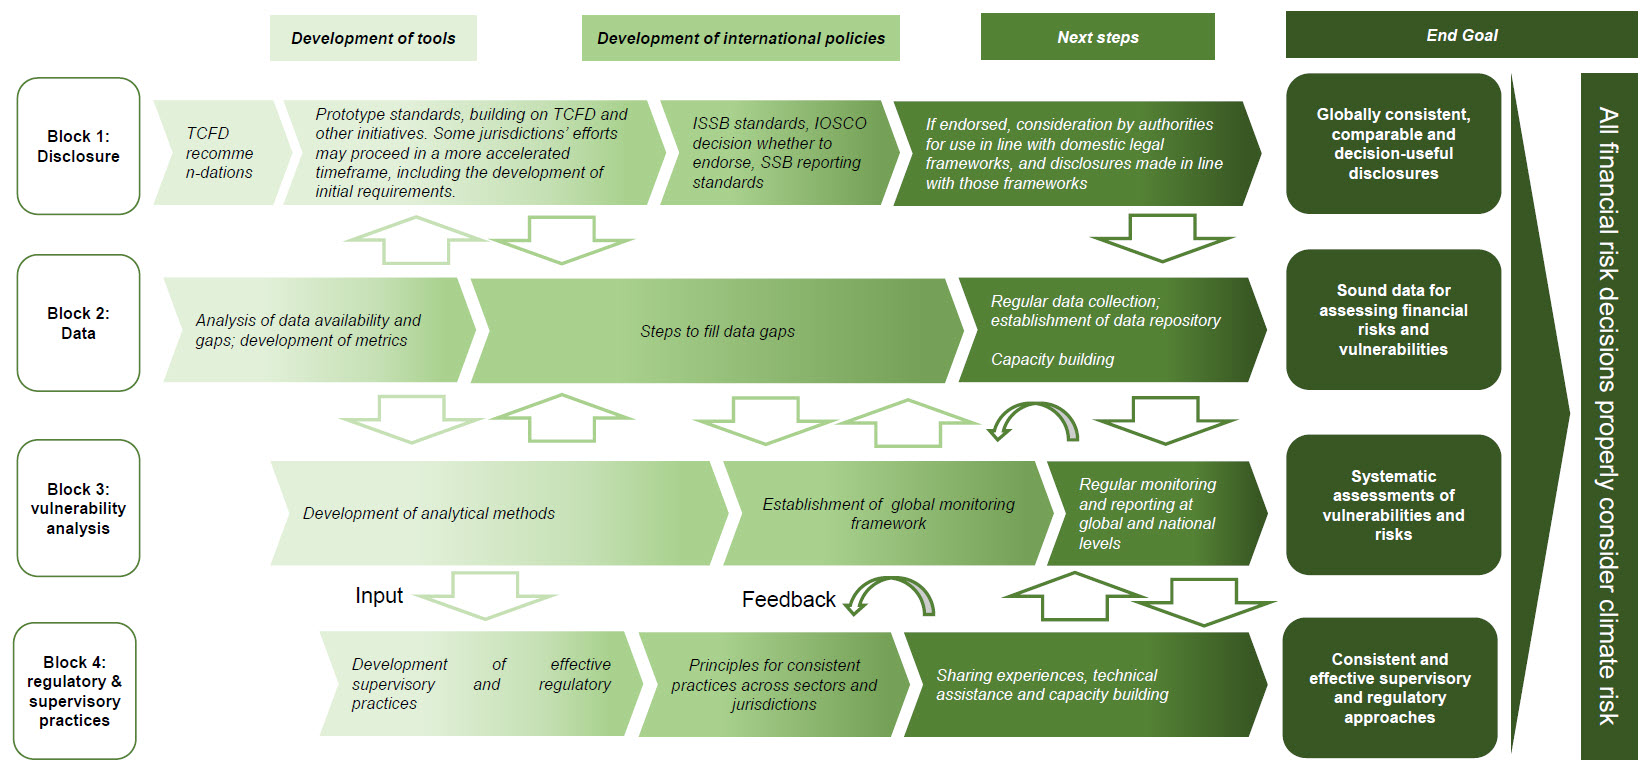 Stylised overview of the FSB’s roadmap for addressing climate-related financial risks